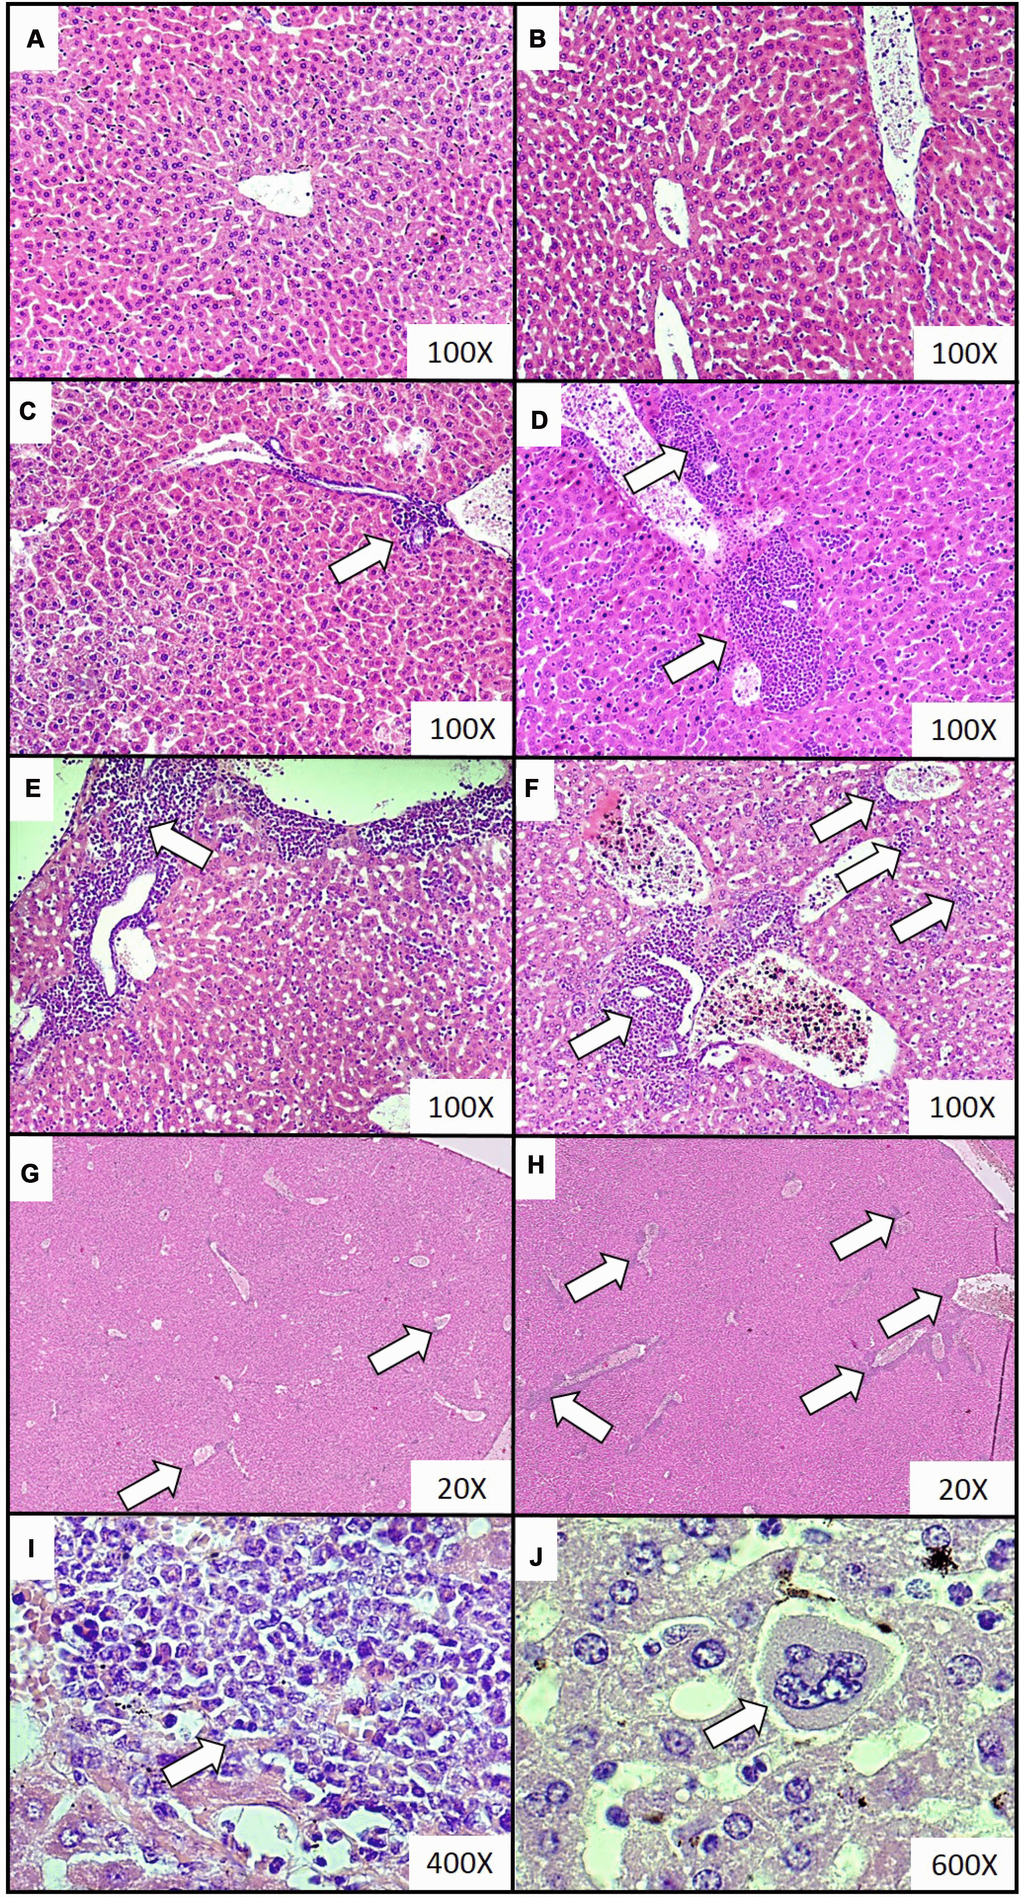 Representative histological images of the extramedullary hematopoiesis foci in livers of mice injected with 4T1 cancer cells. Extramedullary hematopoiesis was diagnosed histologically at increasing time intervals; observations were made based on slides from livers isolated during necropsy in animals injected with saline (control) (A) or after 0 (B), 2 (C), 3 (D), 4 (E) and 5 (F) weeks since the injection of 4T1-cancer cells. Hematoxylin and eosin staining, magnification of 100X. Additional images under lower optical magnification (20x) present extramedullary hematopoiesis foci in samples of lungs resected from mice at the second (G) and fifth (H) week of breast cancer development. The representative foci under higher magnification show the progenitor hematopoietic cells next to mature granulocytes (I) (400x) and a megakaryocyte (J) (600x). Extramedullary hematopoiesis foci are marked with white arrows. More experimental details are given in the Materials and methods section.